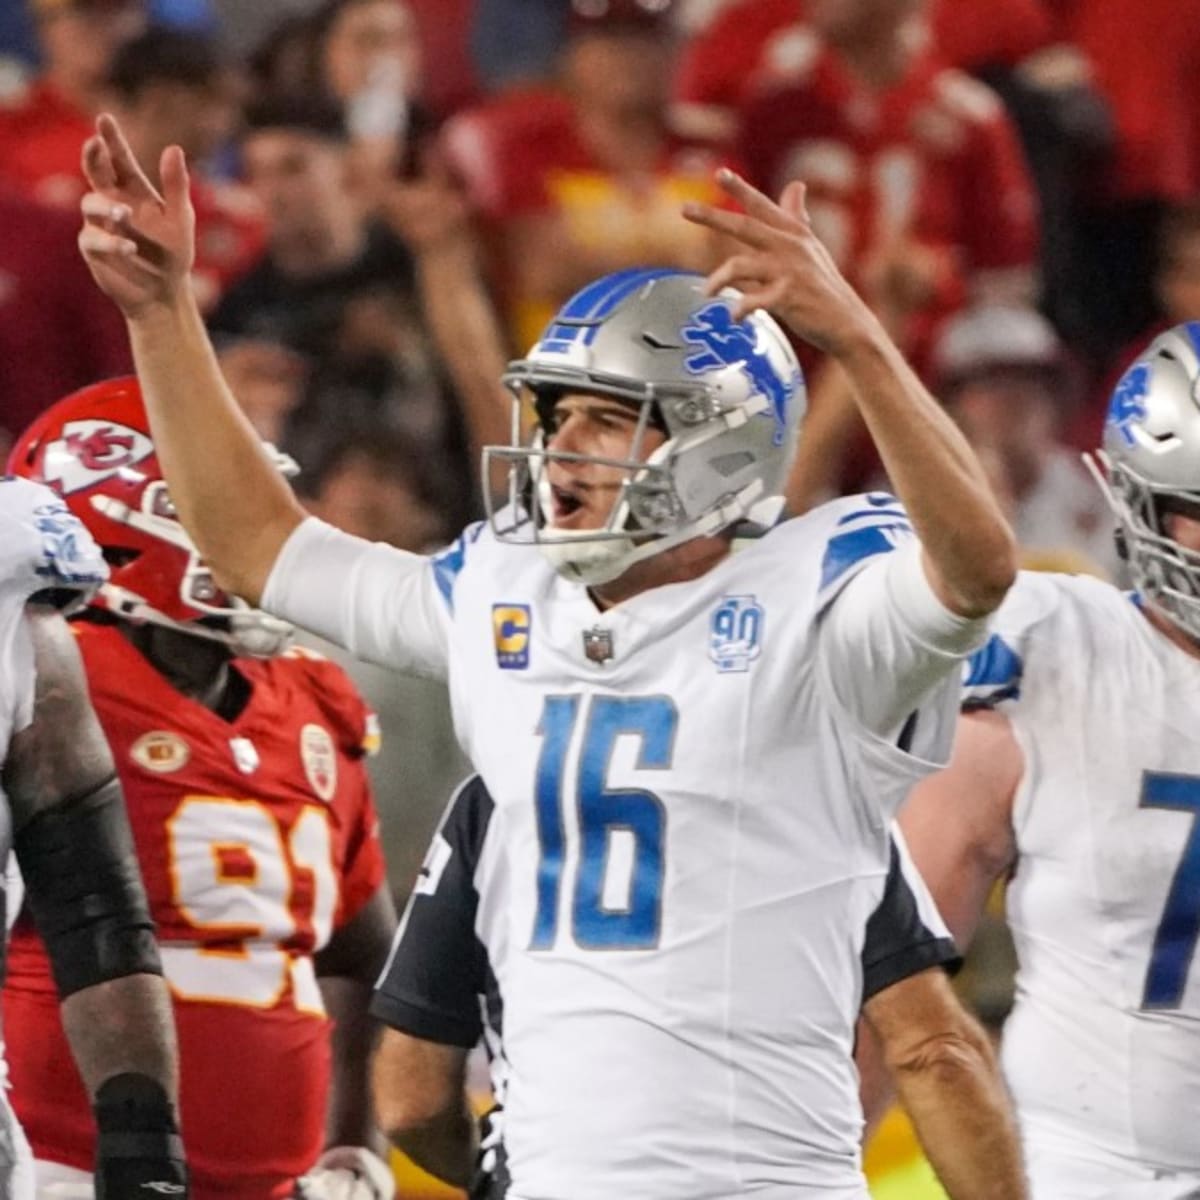 Top 5 Detroit Lions performances in win over Green Bay Packers